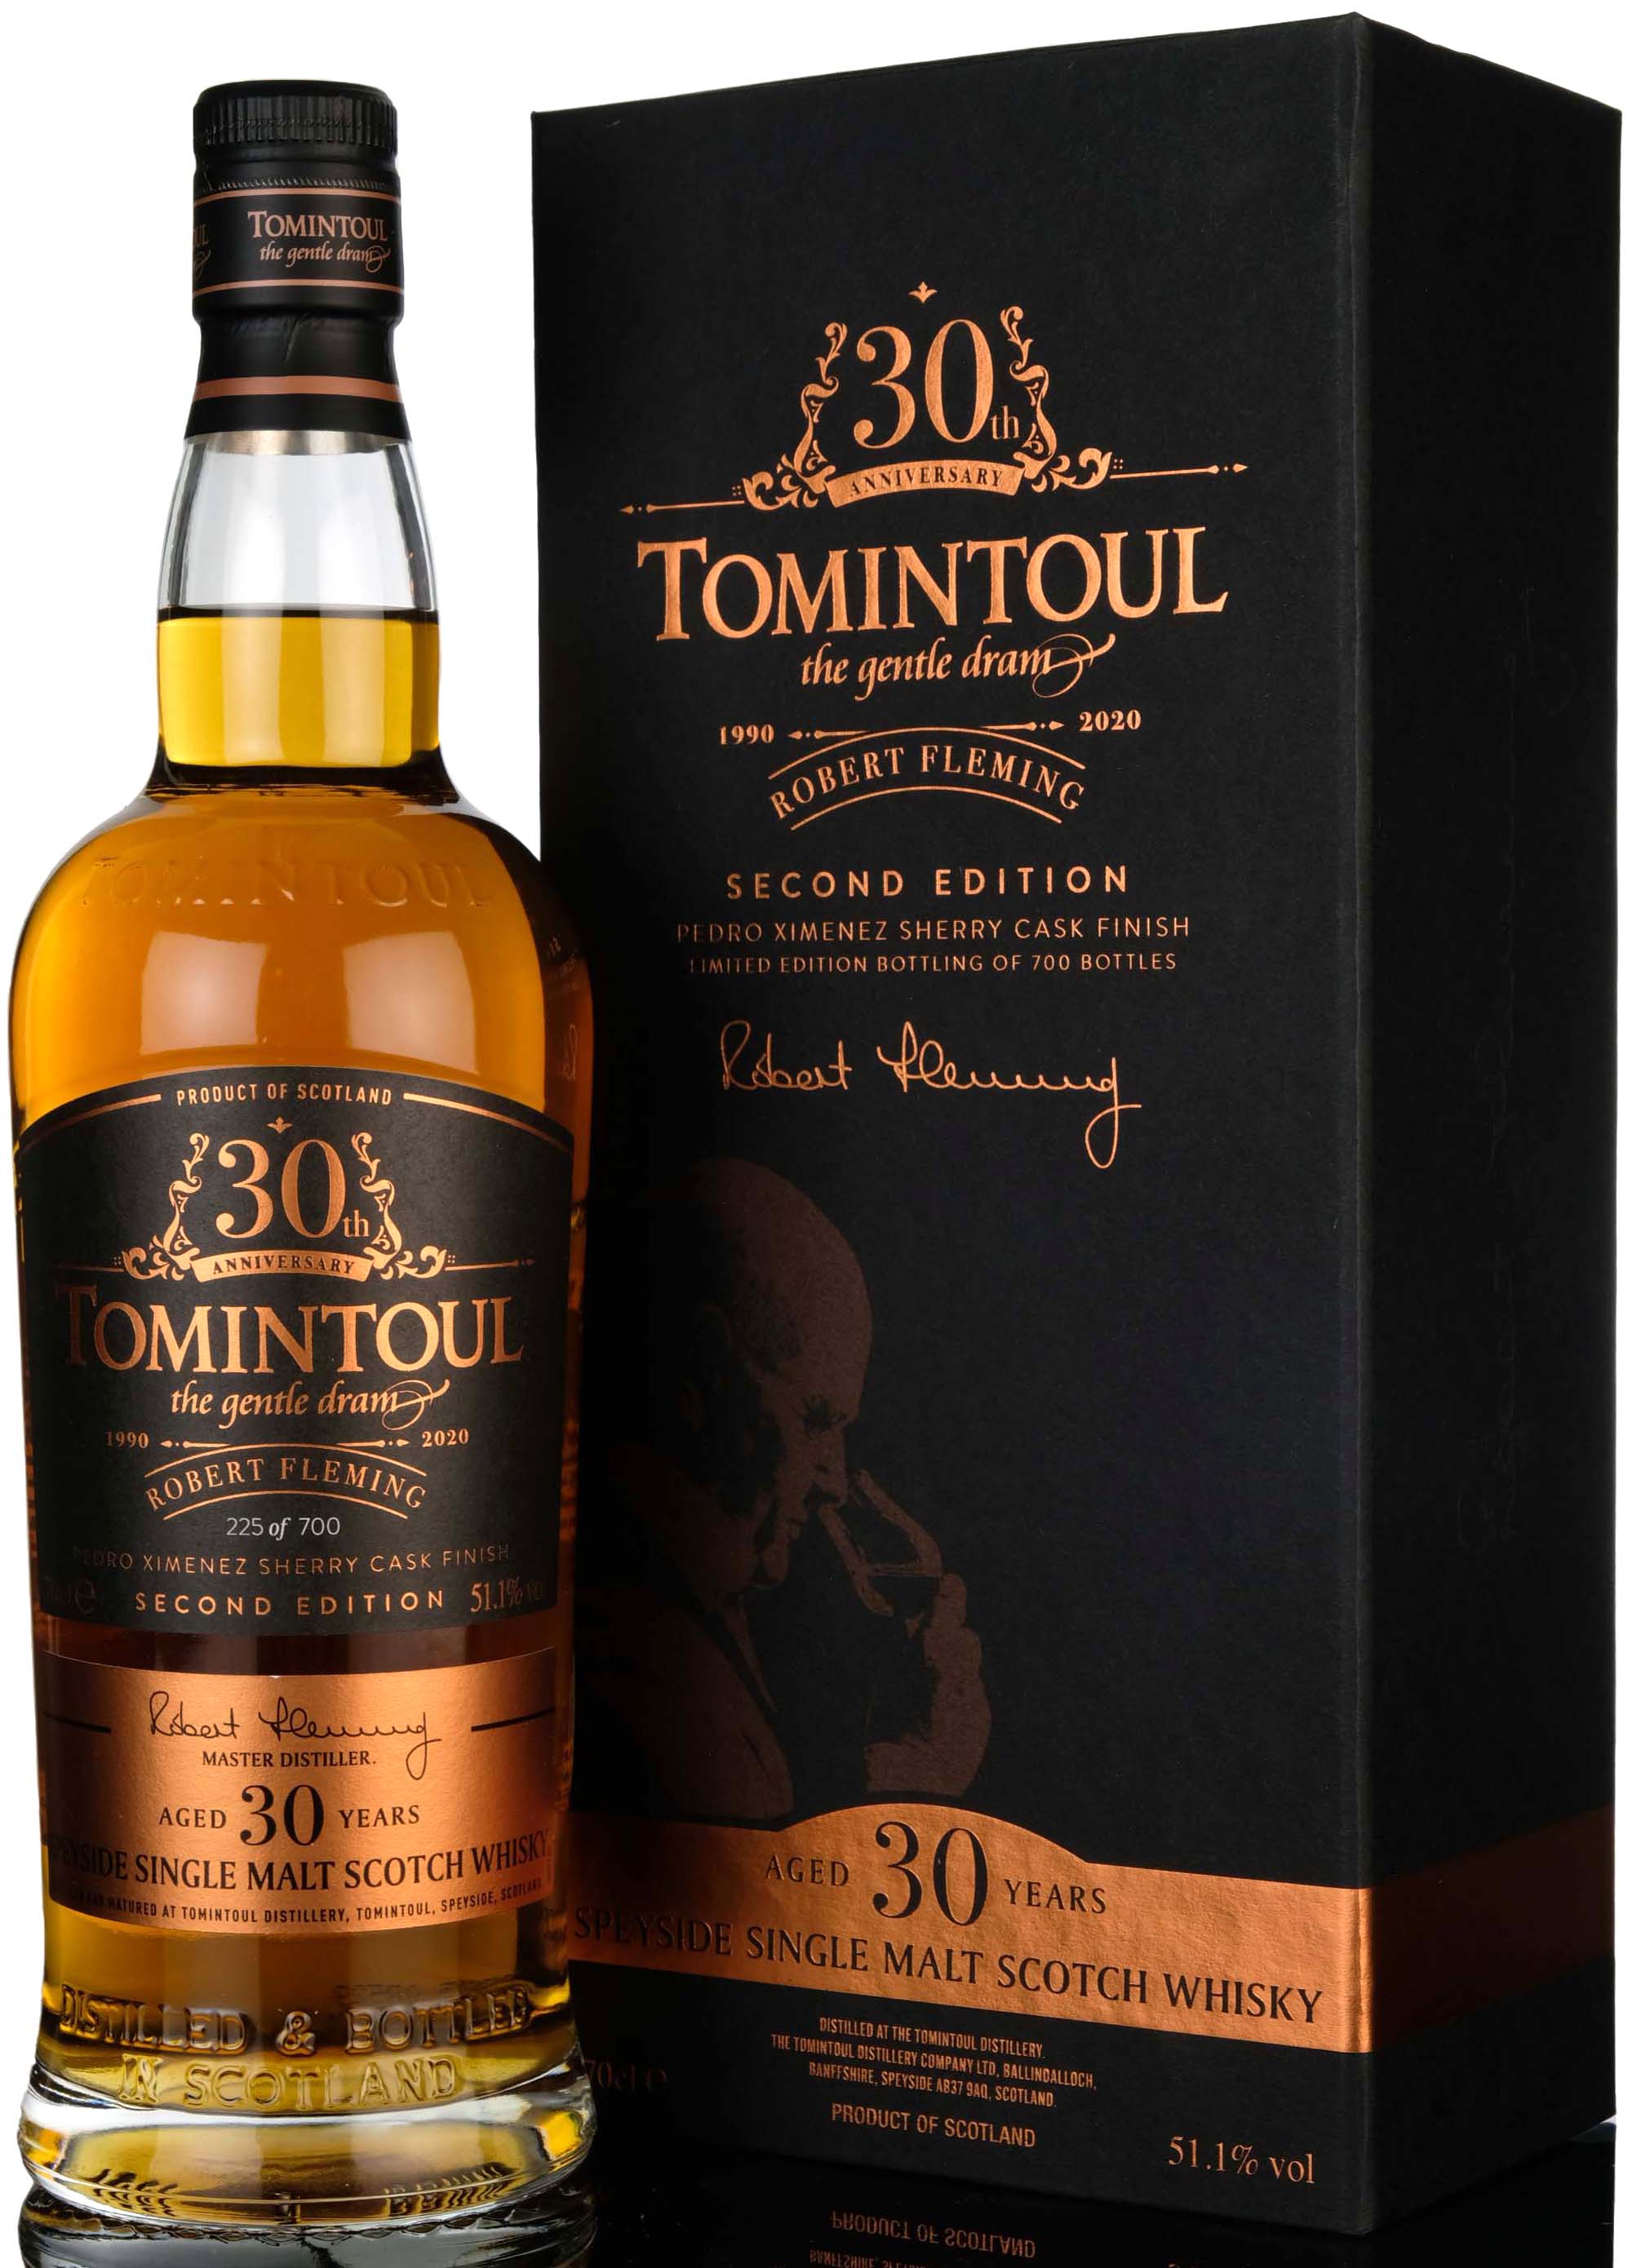 Tomintoul 1990-2020 - 30 Year Old - Robert Fleming 30th Anniversary - 2nd Edition